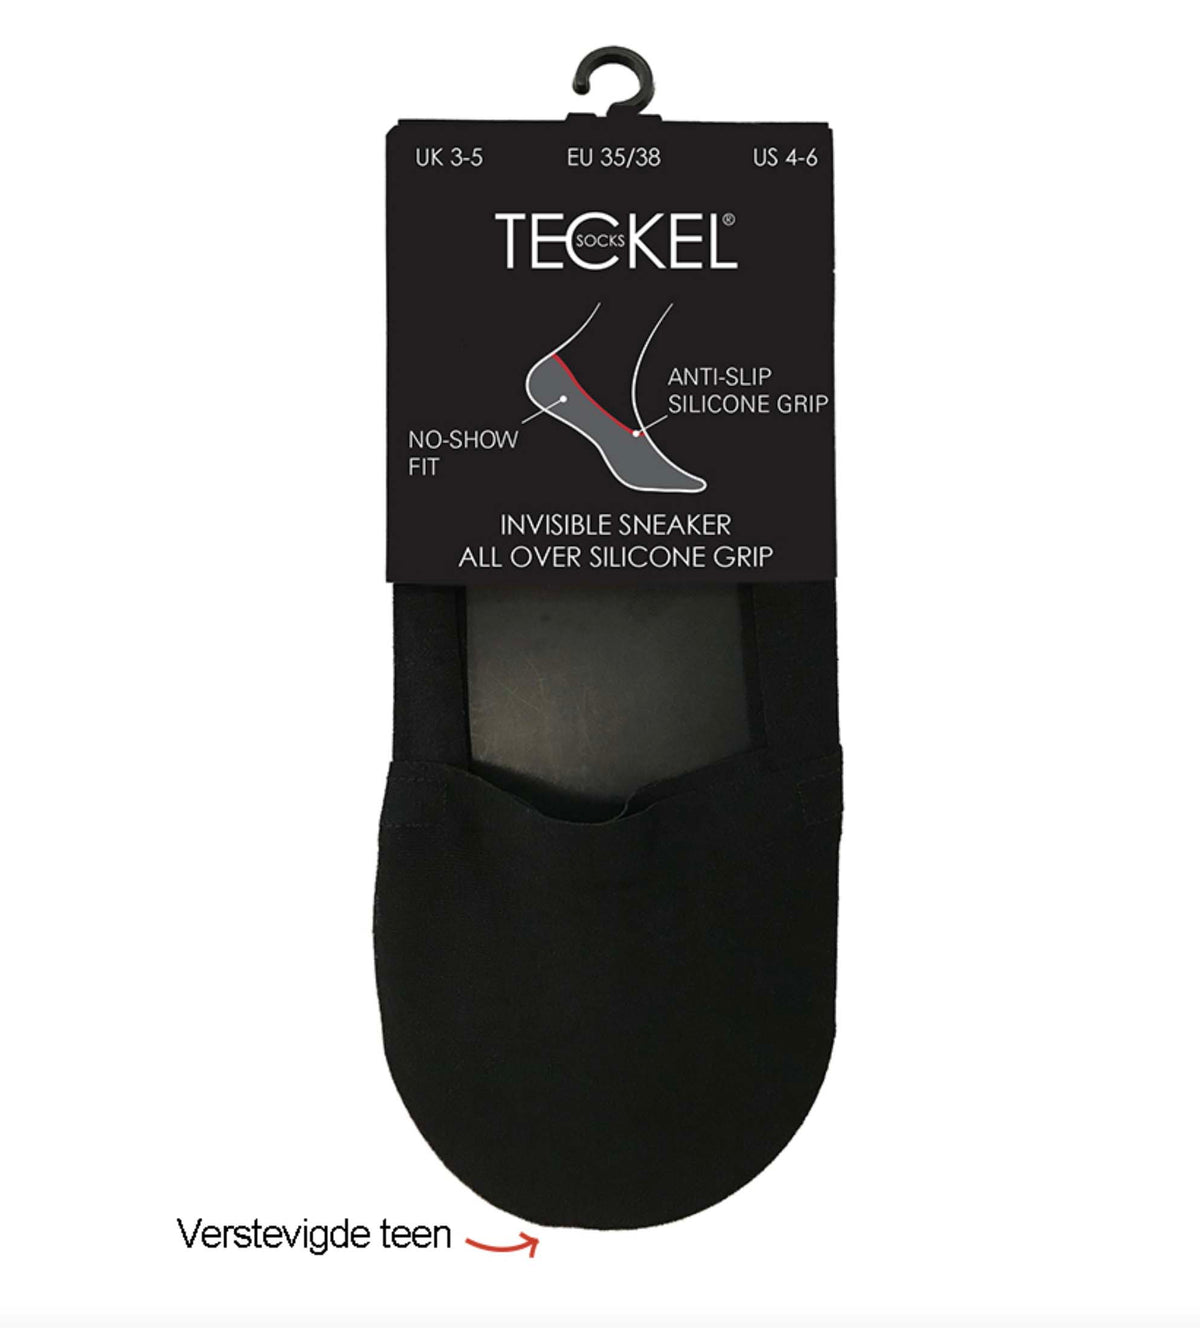 Invisible sneaker Teckel silic 545 1000 wit